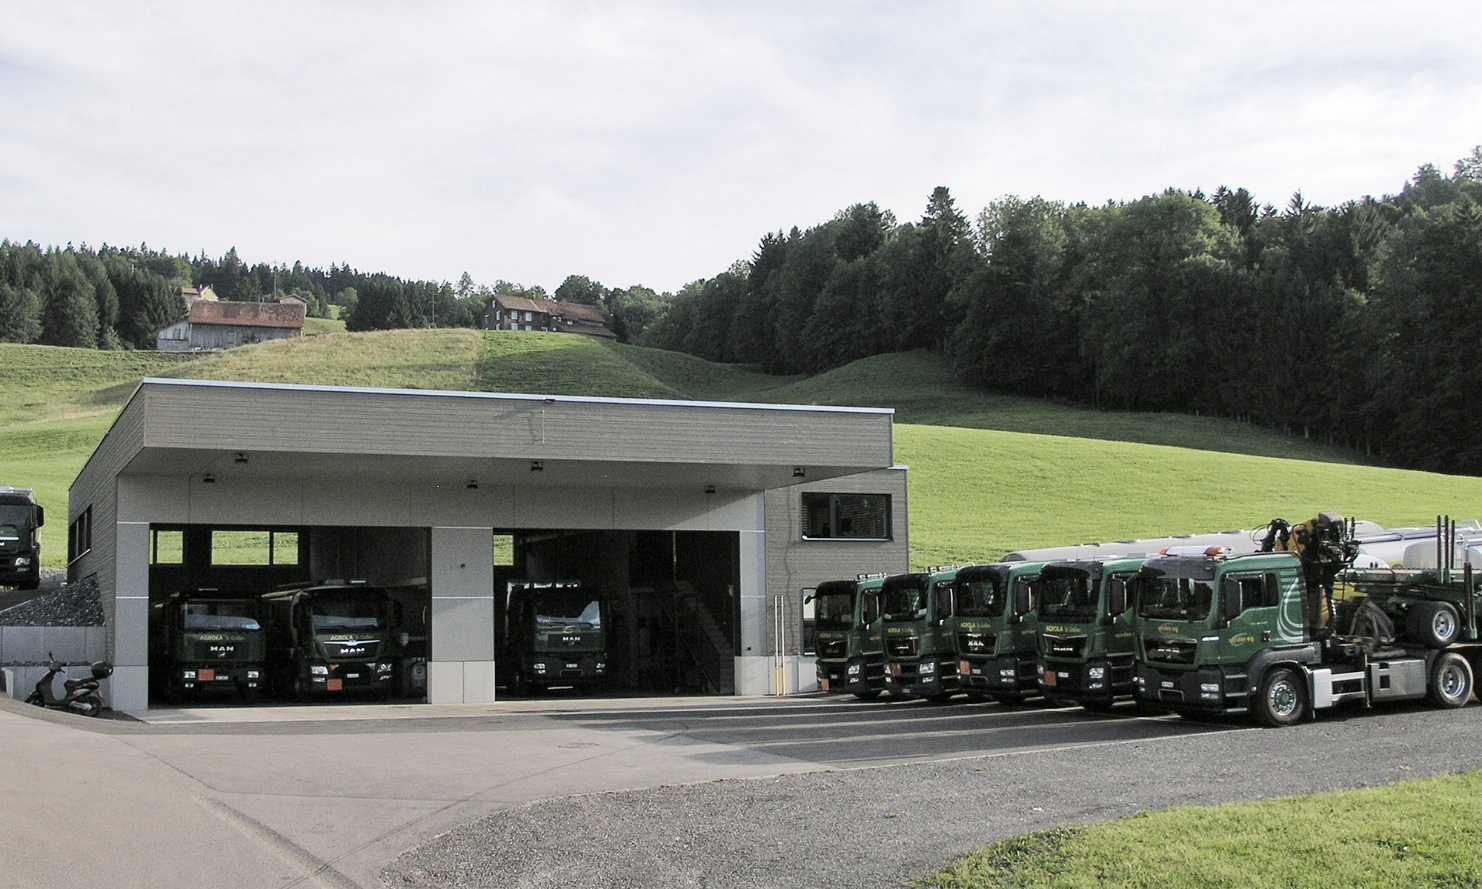 Overall view of the lorry garage with the lorry fleet parked in front.